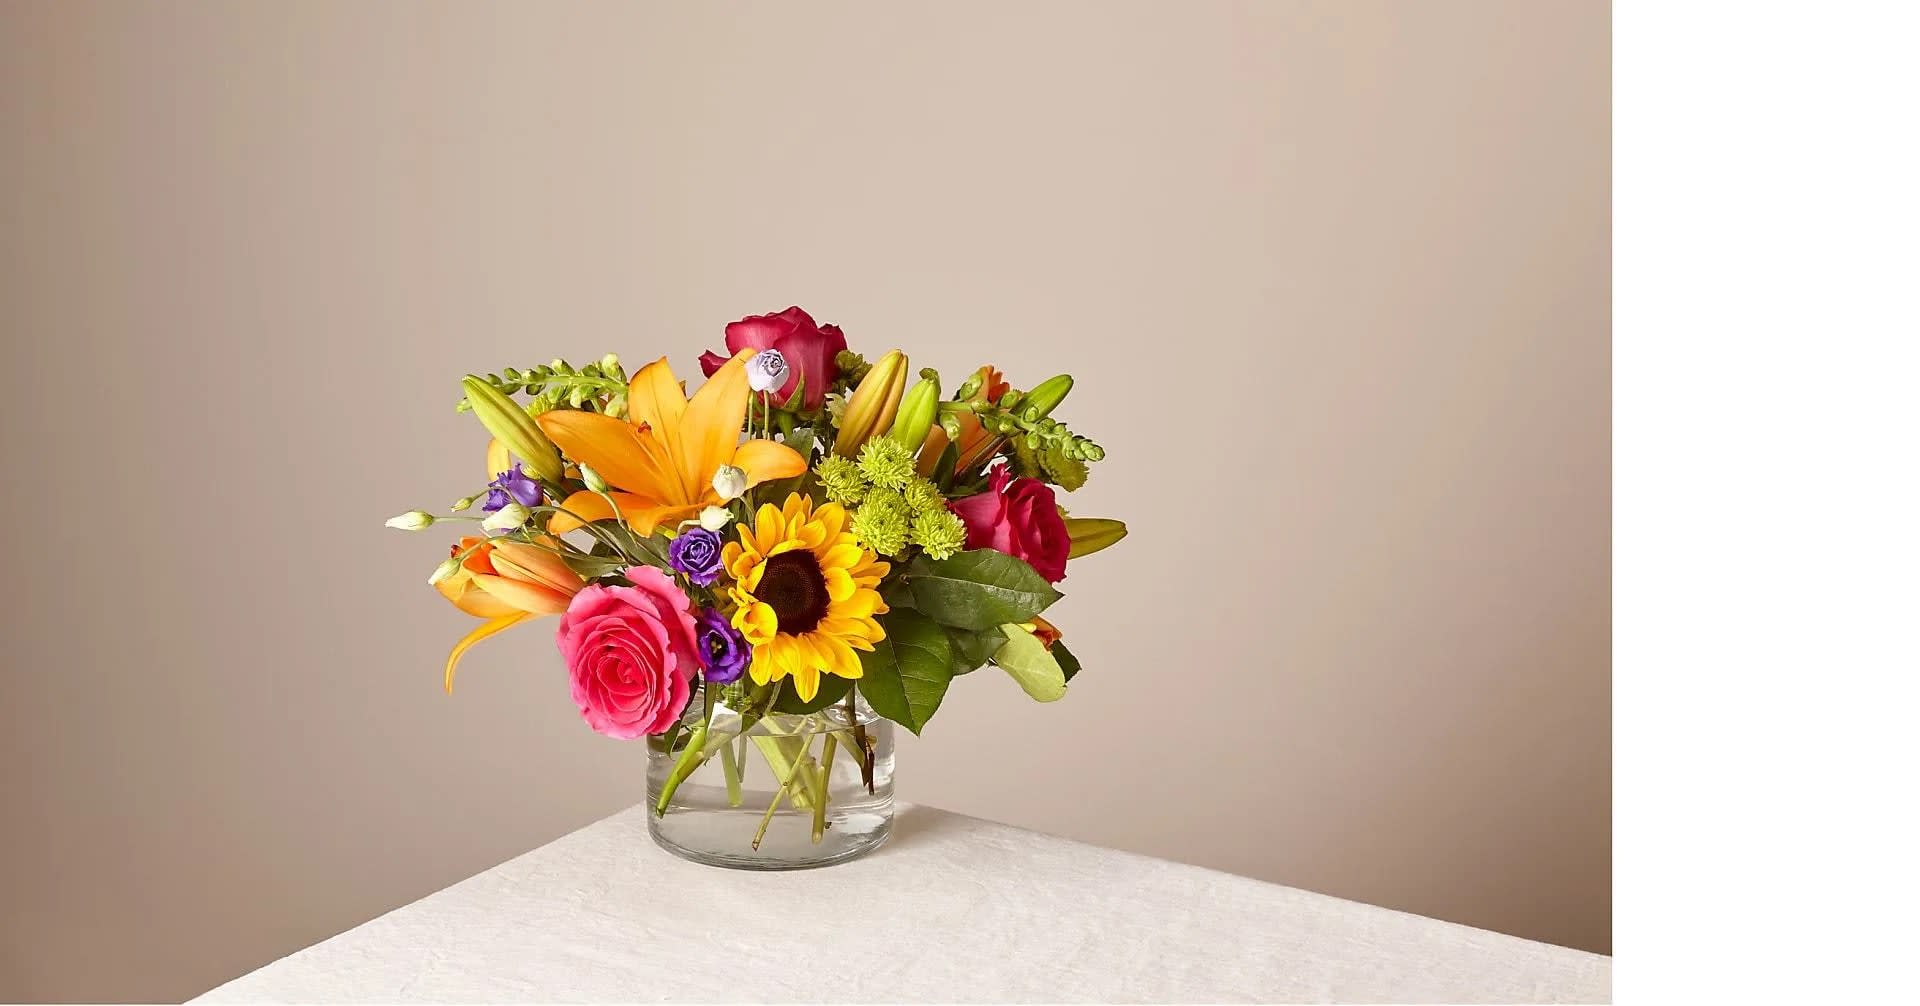 Best Day Bouquet (Vase will vary) - Make this day their best day. Our local florist handcraft a colorful array of flowers in a clear glass vase to create a celebration in bloom. Perfect to give for a special reason or to simply share a smile. Complete with Lilies, Roses, Snapdragons and Sunflowers.